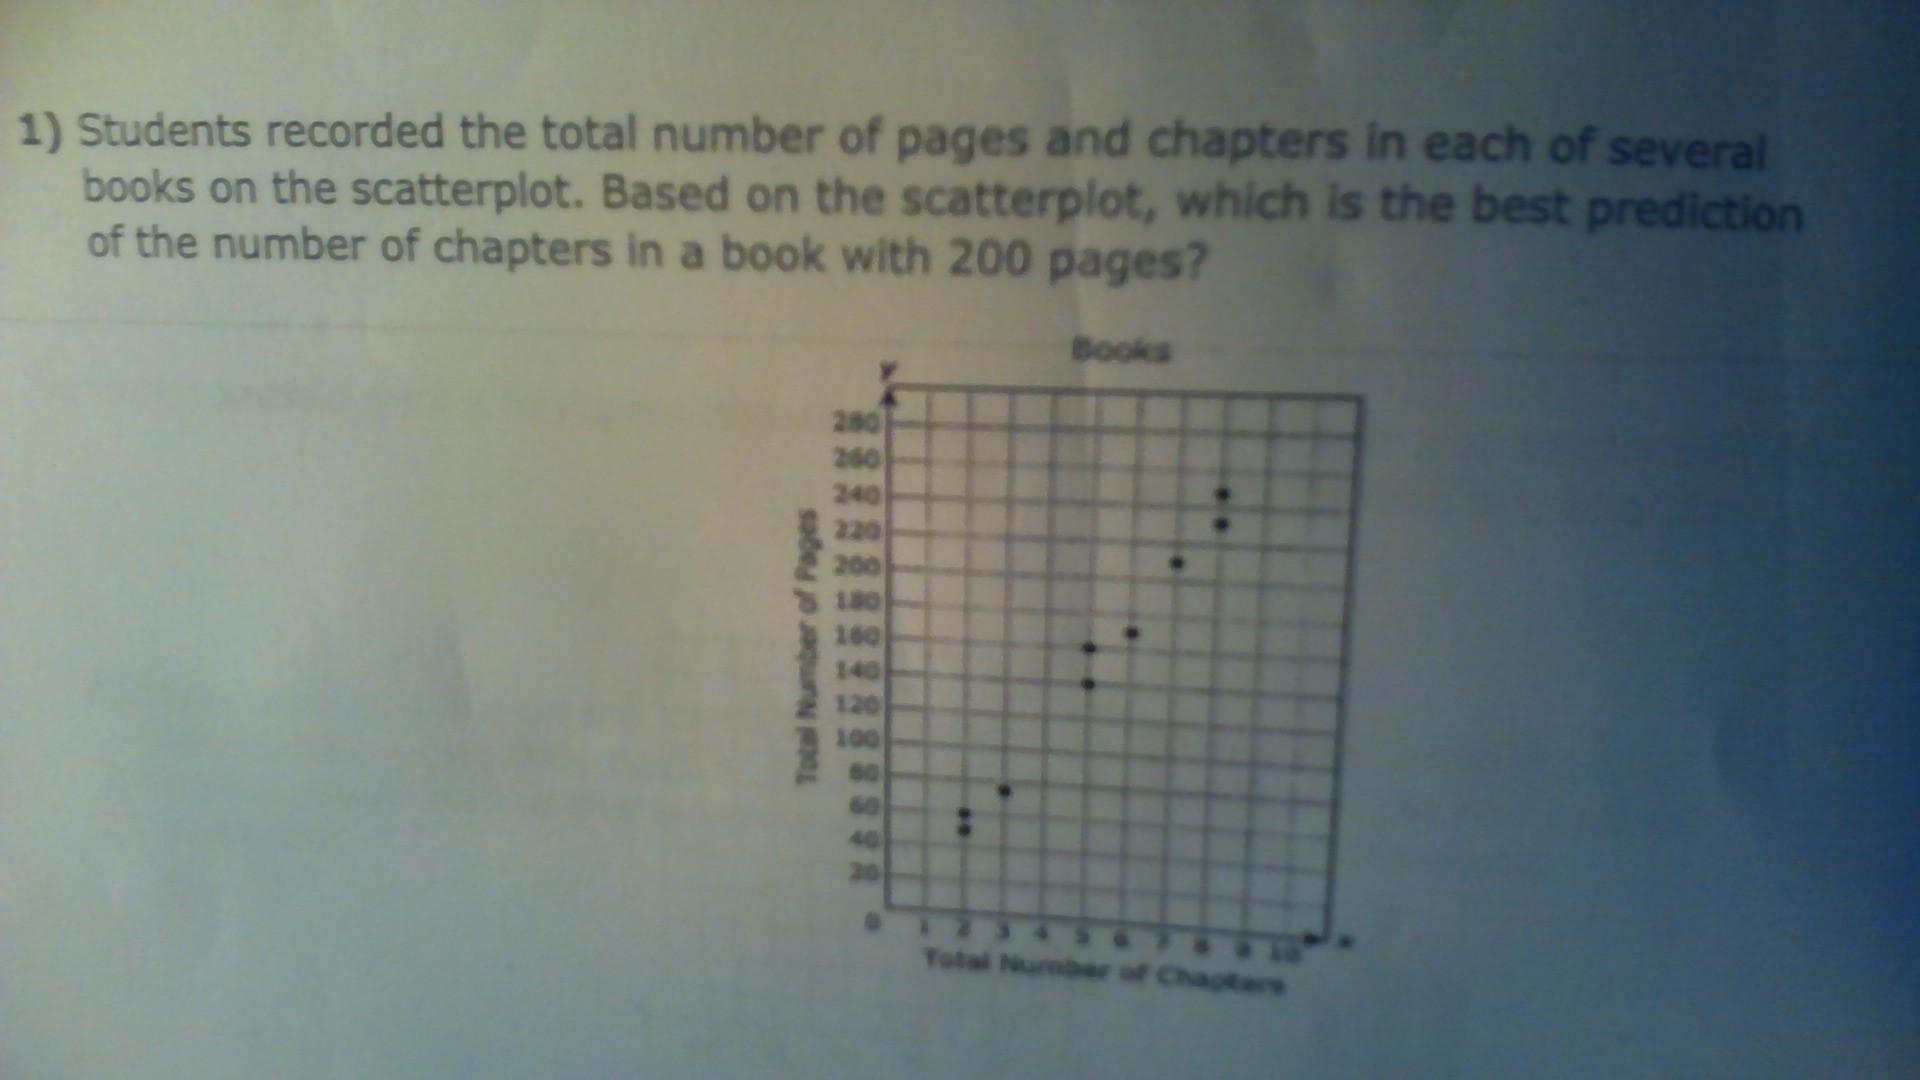 Students Recorded The Total Number Of Pages And Chapters In Each Of Several Books On The Scatterplot.